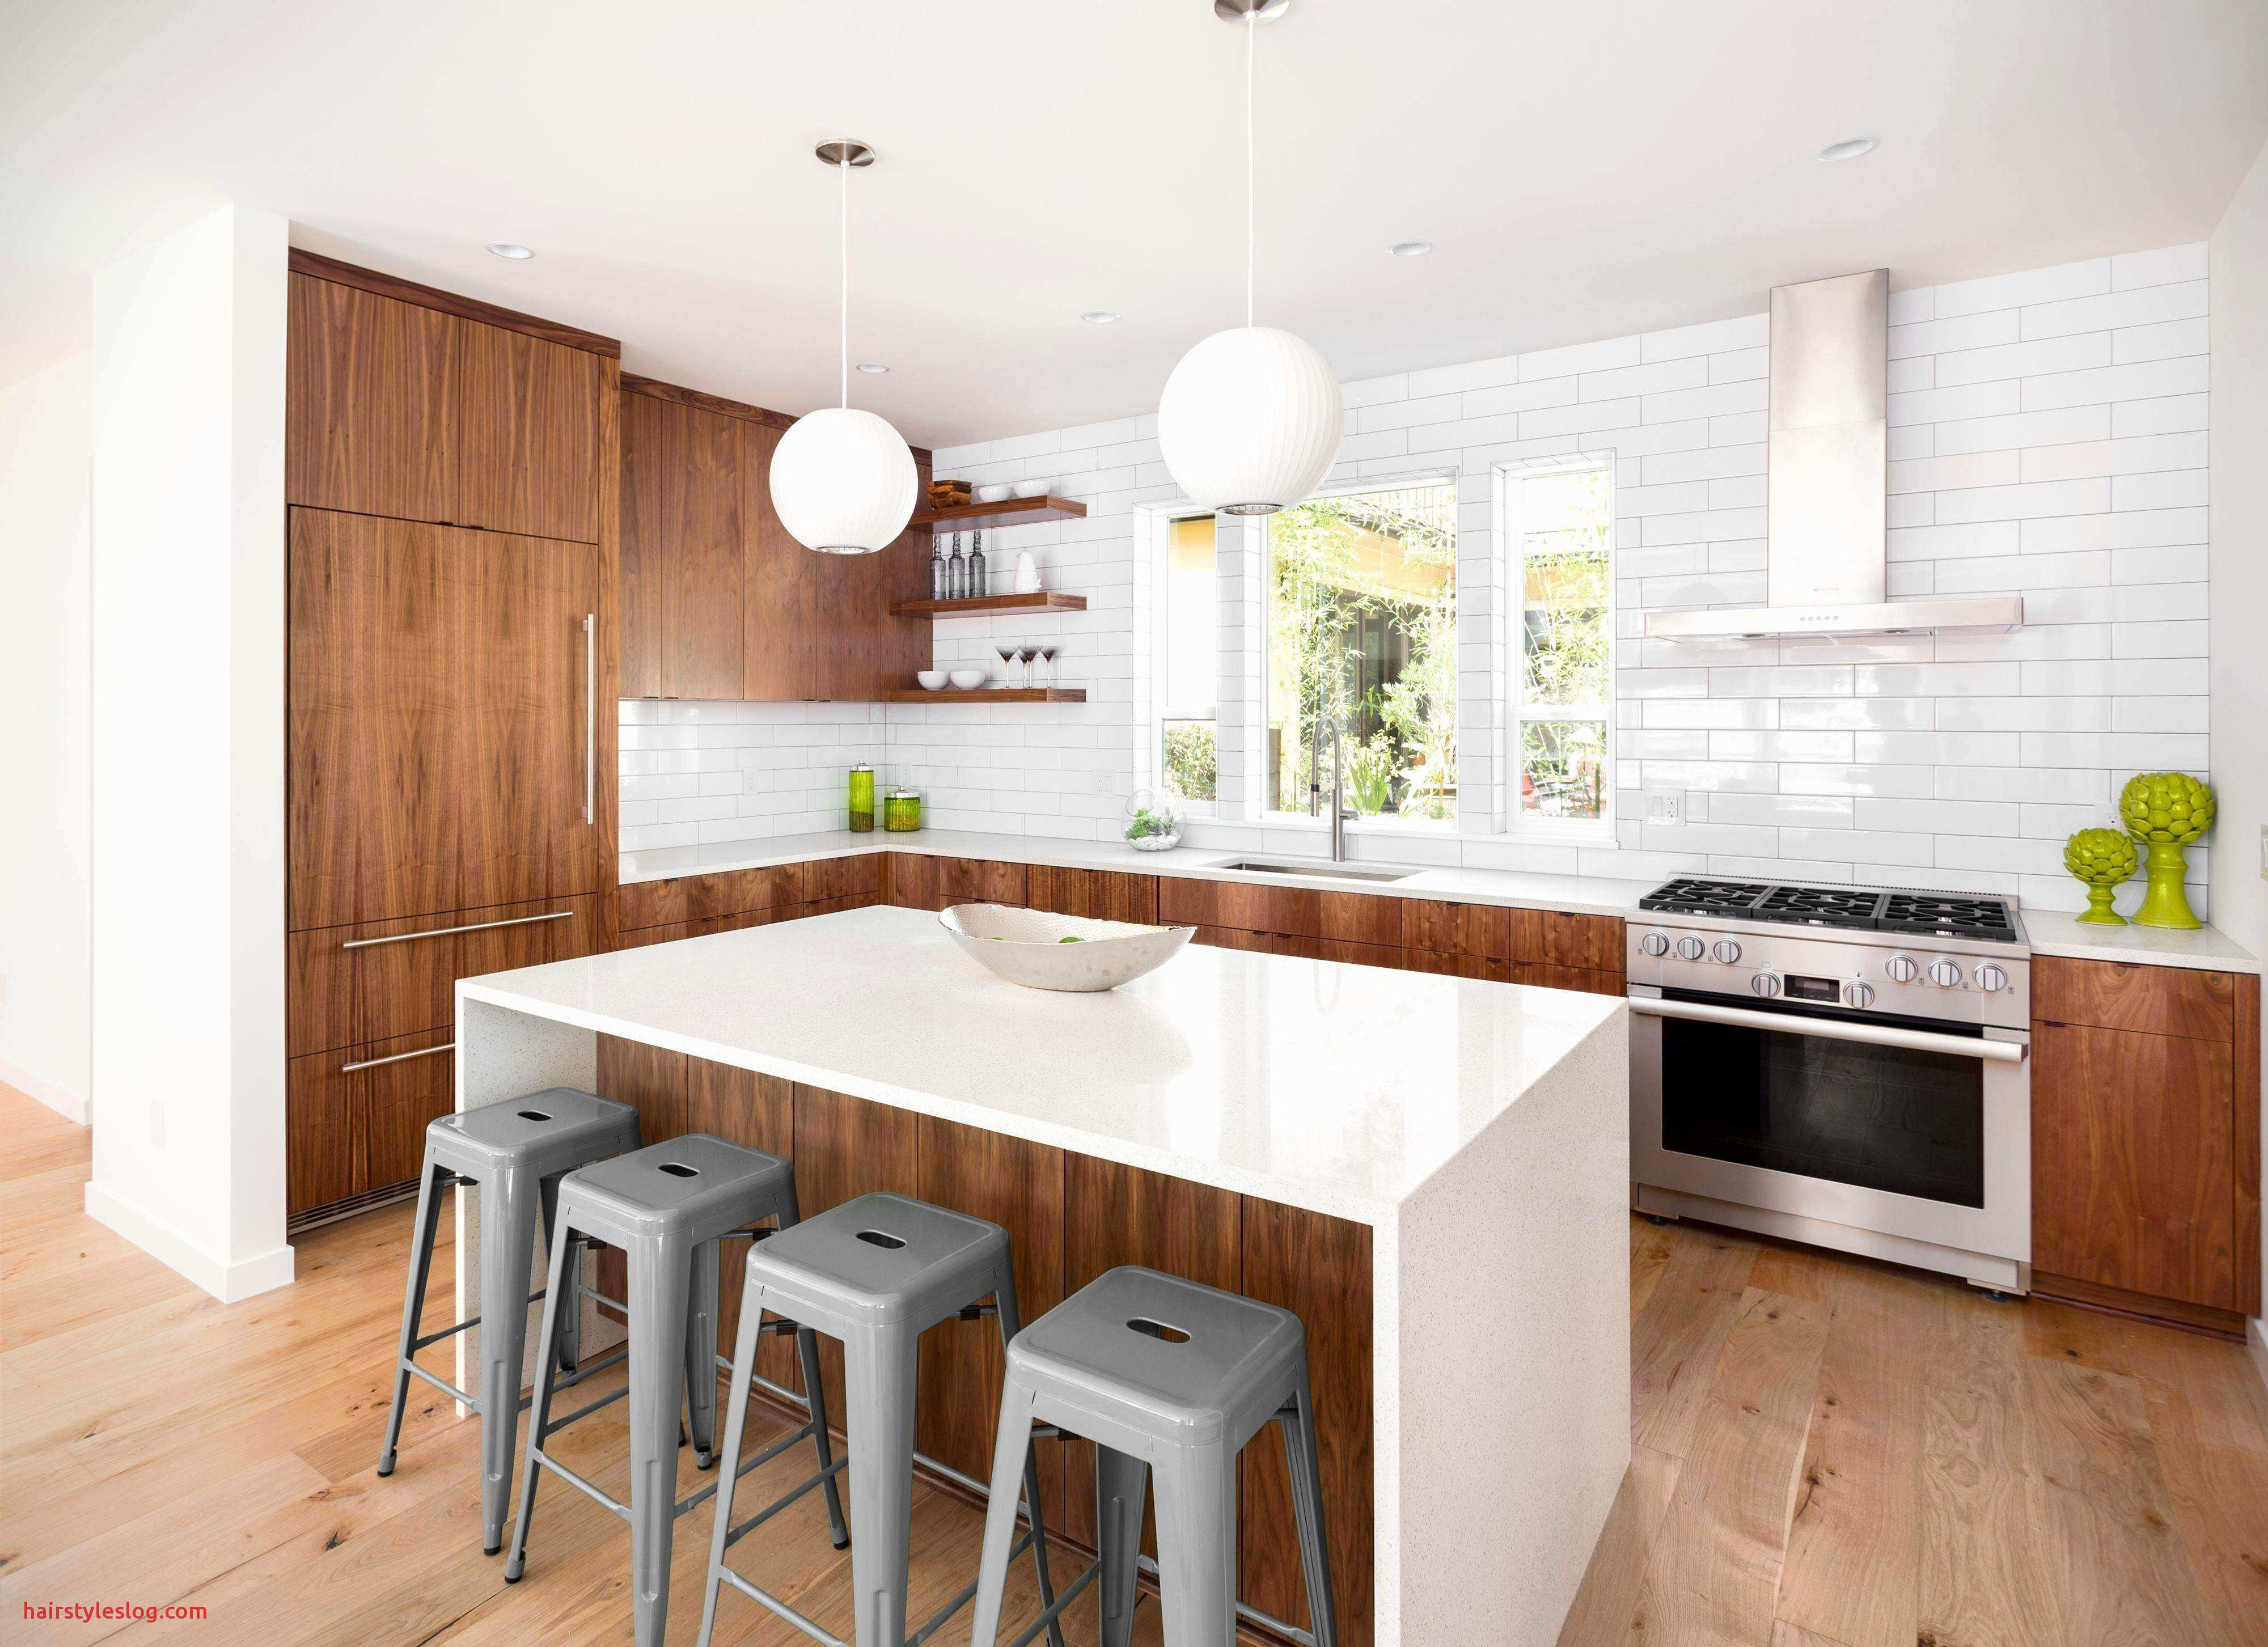 13 Popular wholesale Hardwood Flooring Near Me 2024 free download wholesale hardwood flooring near me of alluring kitchen cabinets for sale near me intended for house decor for alluring kitchen cabinets for sale near me intended for house decor used kitche